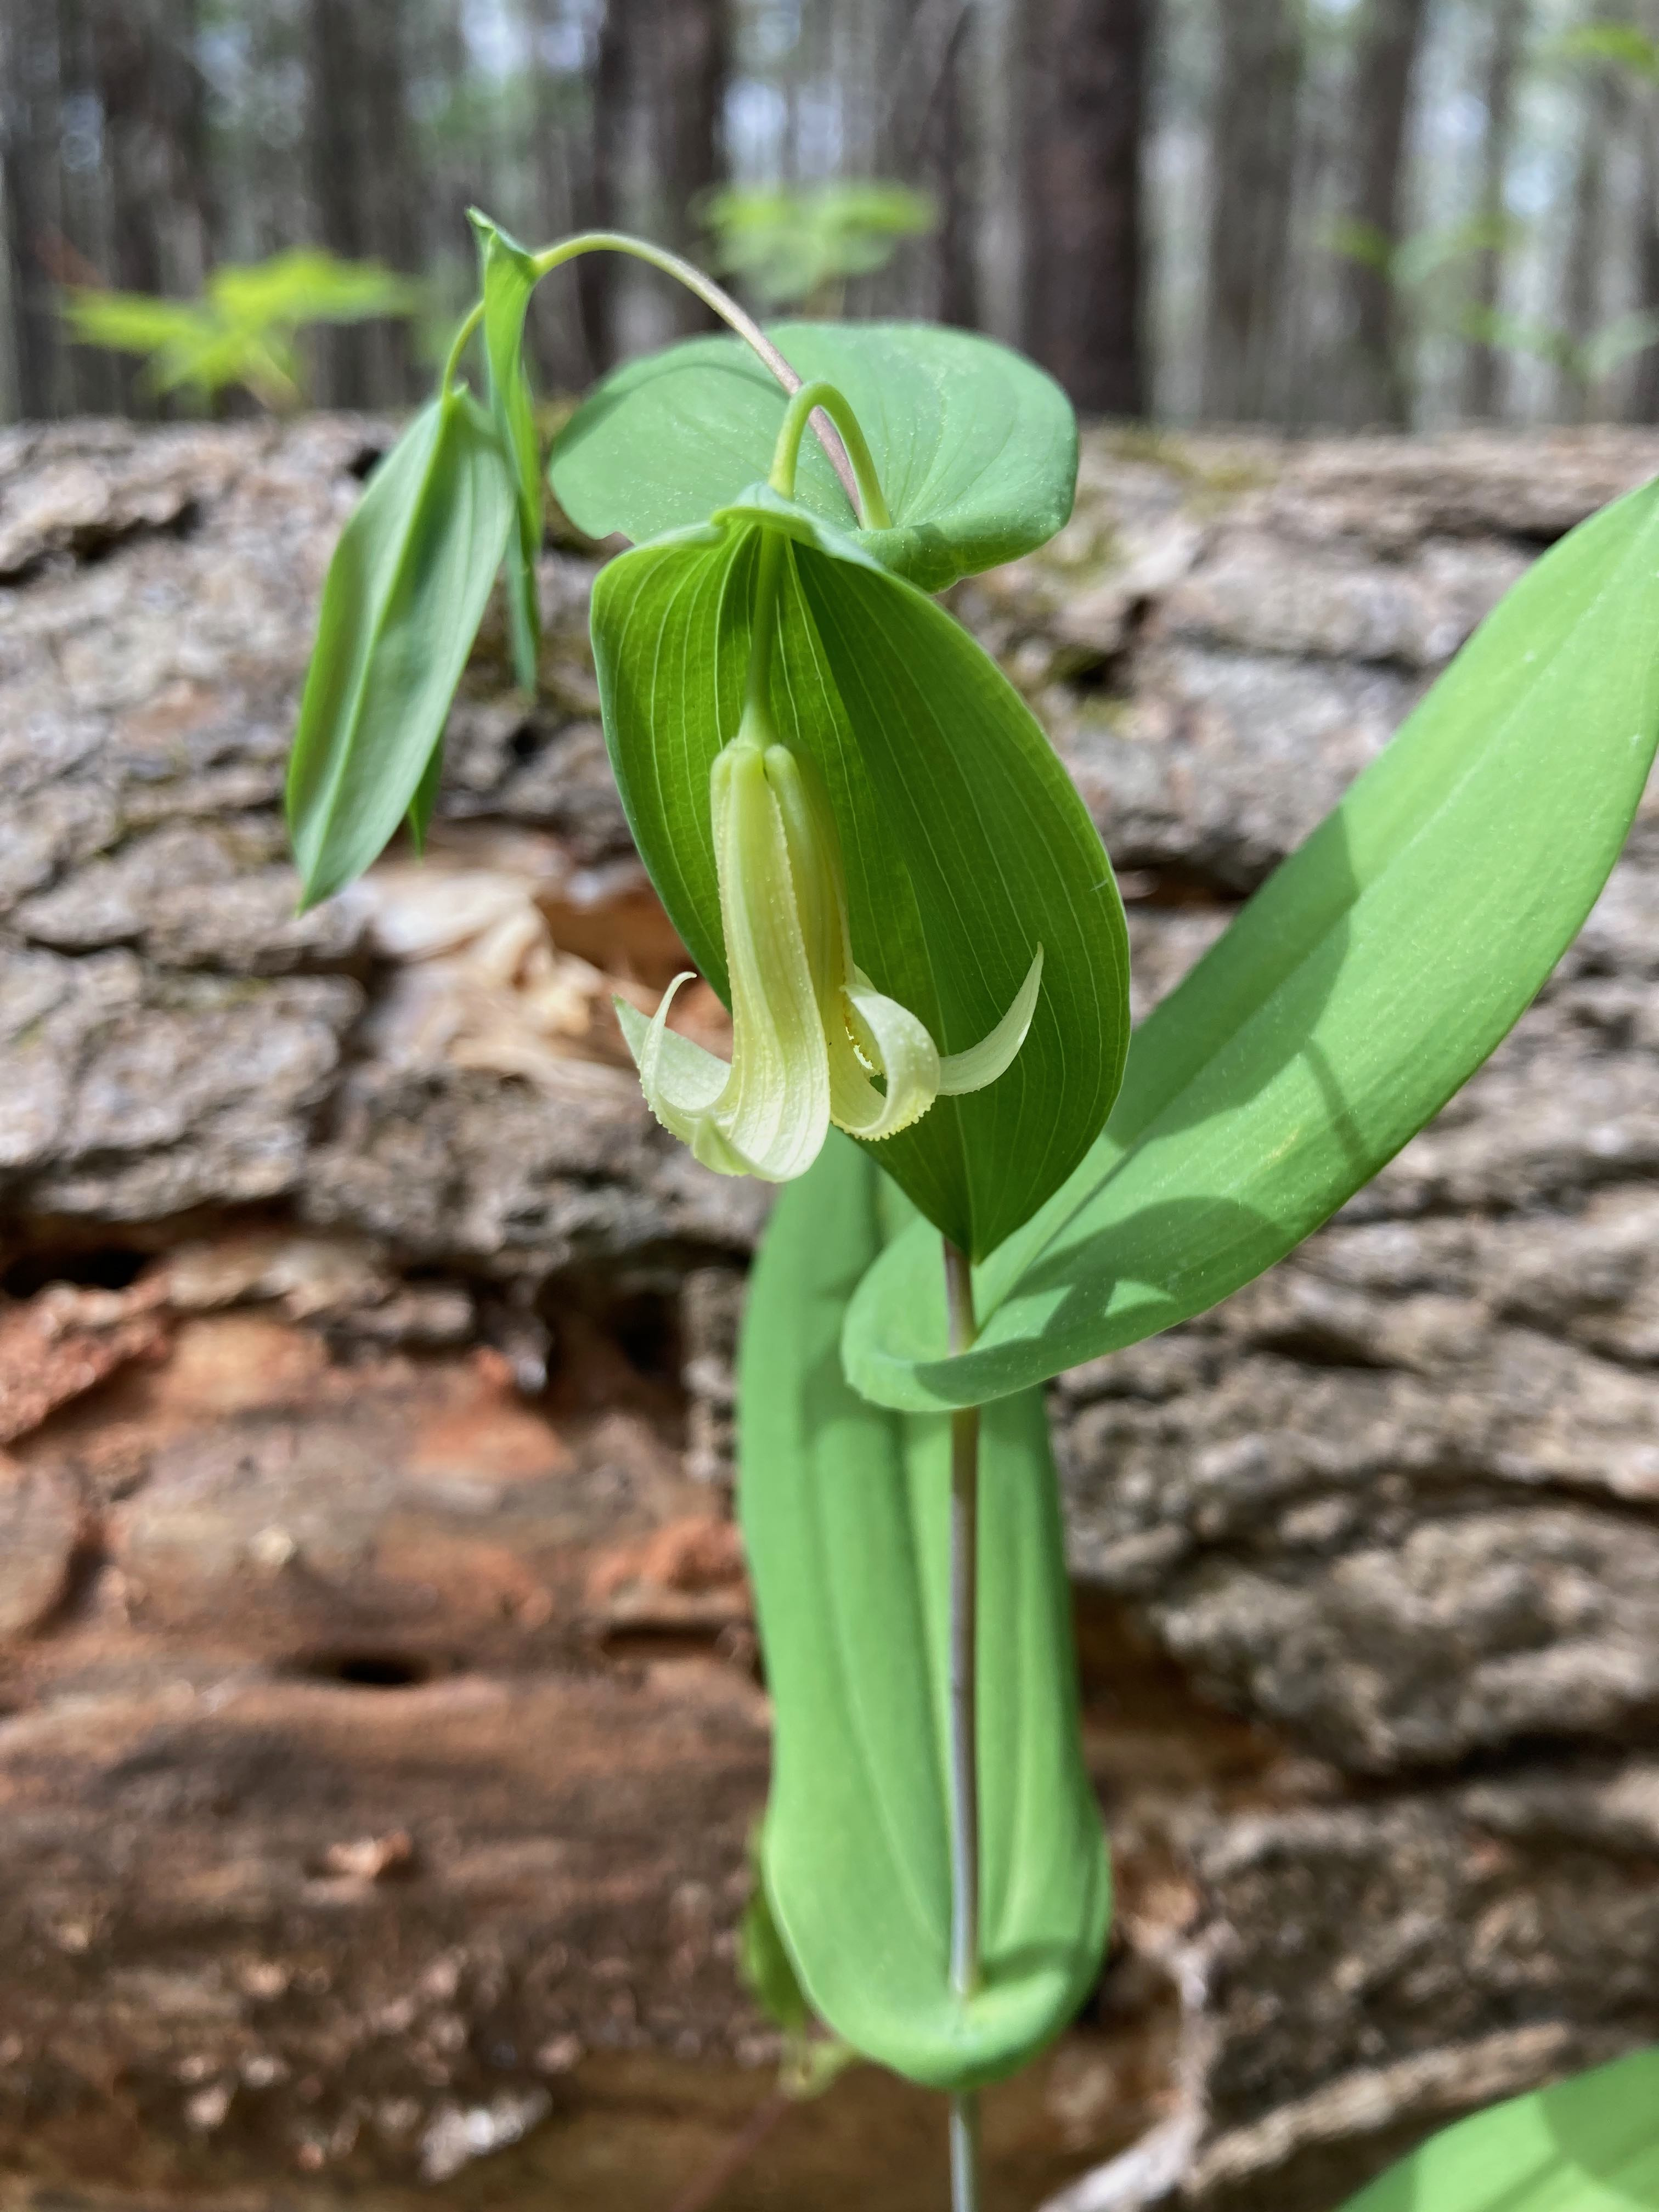 The Scientific Name is Uvularia perfoliata. You will likely hear them called Perfoliate Bellwort, Mealy Bellwort, Merrybells. This picture shows the Distinct perfoliate leaves - the basal edges of the leaf are united around the stem. of Uvularia perfoliata